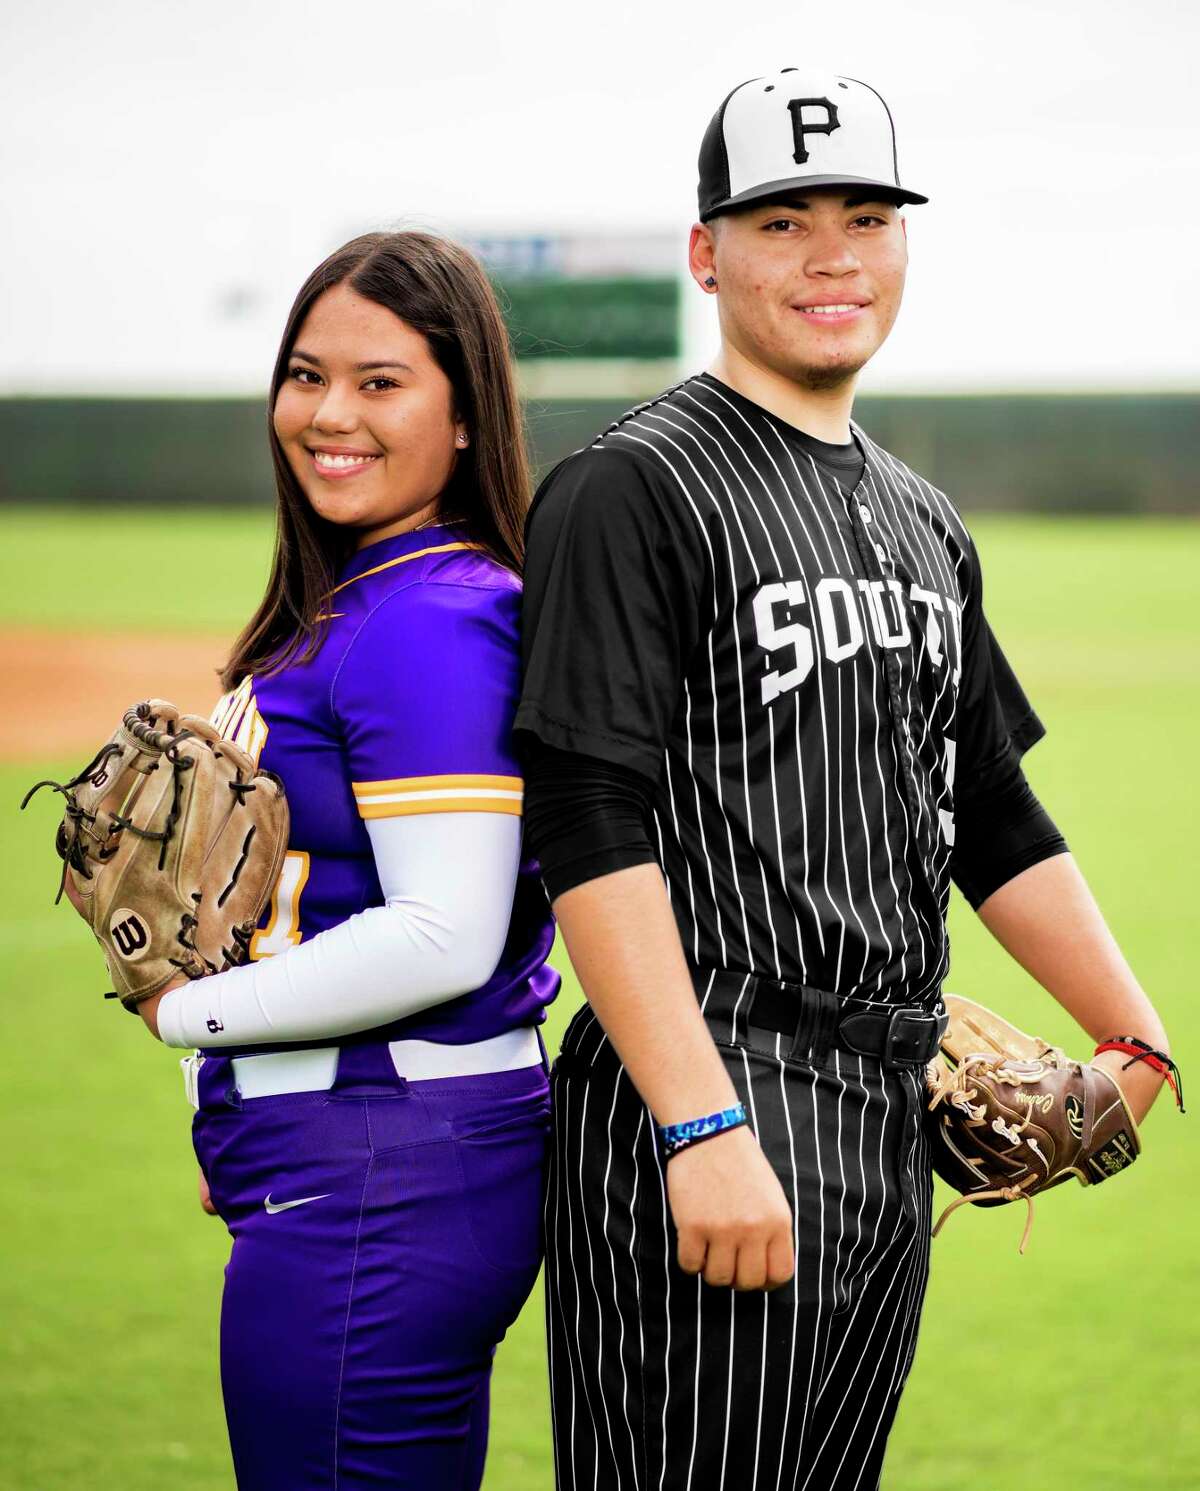 Siblings Alyzza Campos and Greg Campos have both excelled as high school pitchers with Alyzza throwing for the LBJ softball team and Greg for the United South baseball team.